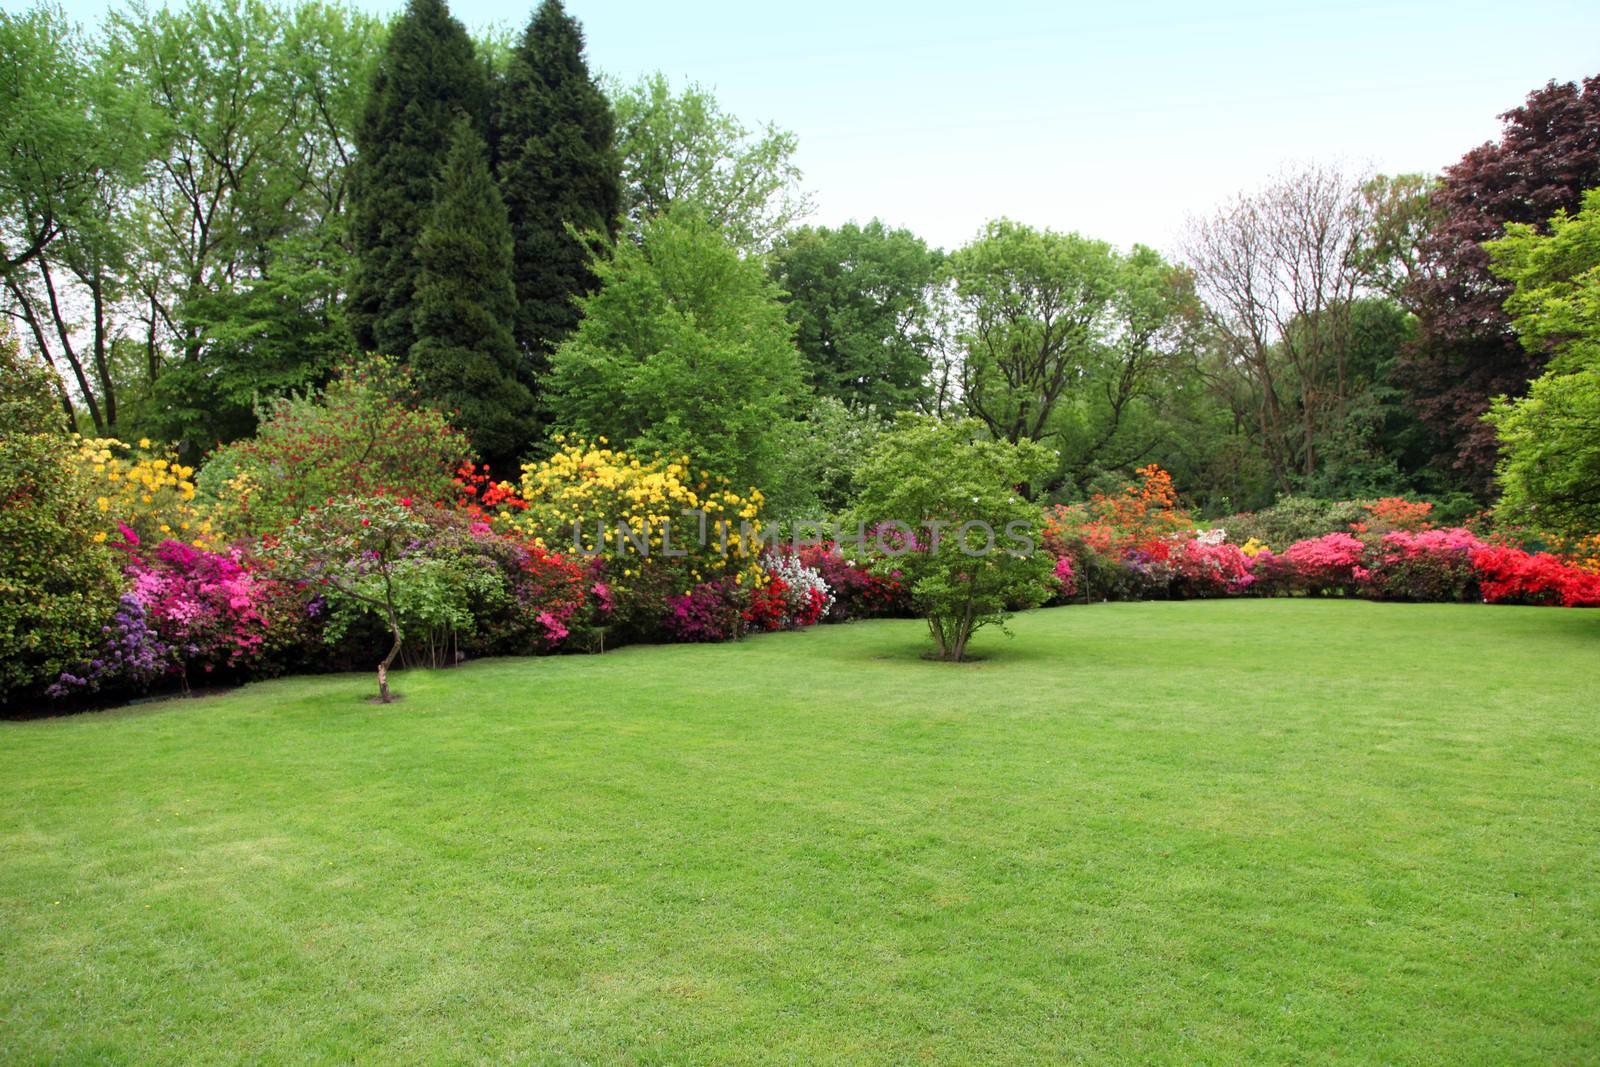 Beautiful manicured lawn in a summer garden with a border of bright colourful flowering shrubs and trees